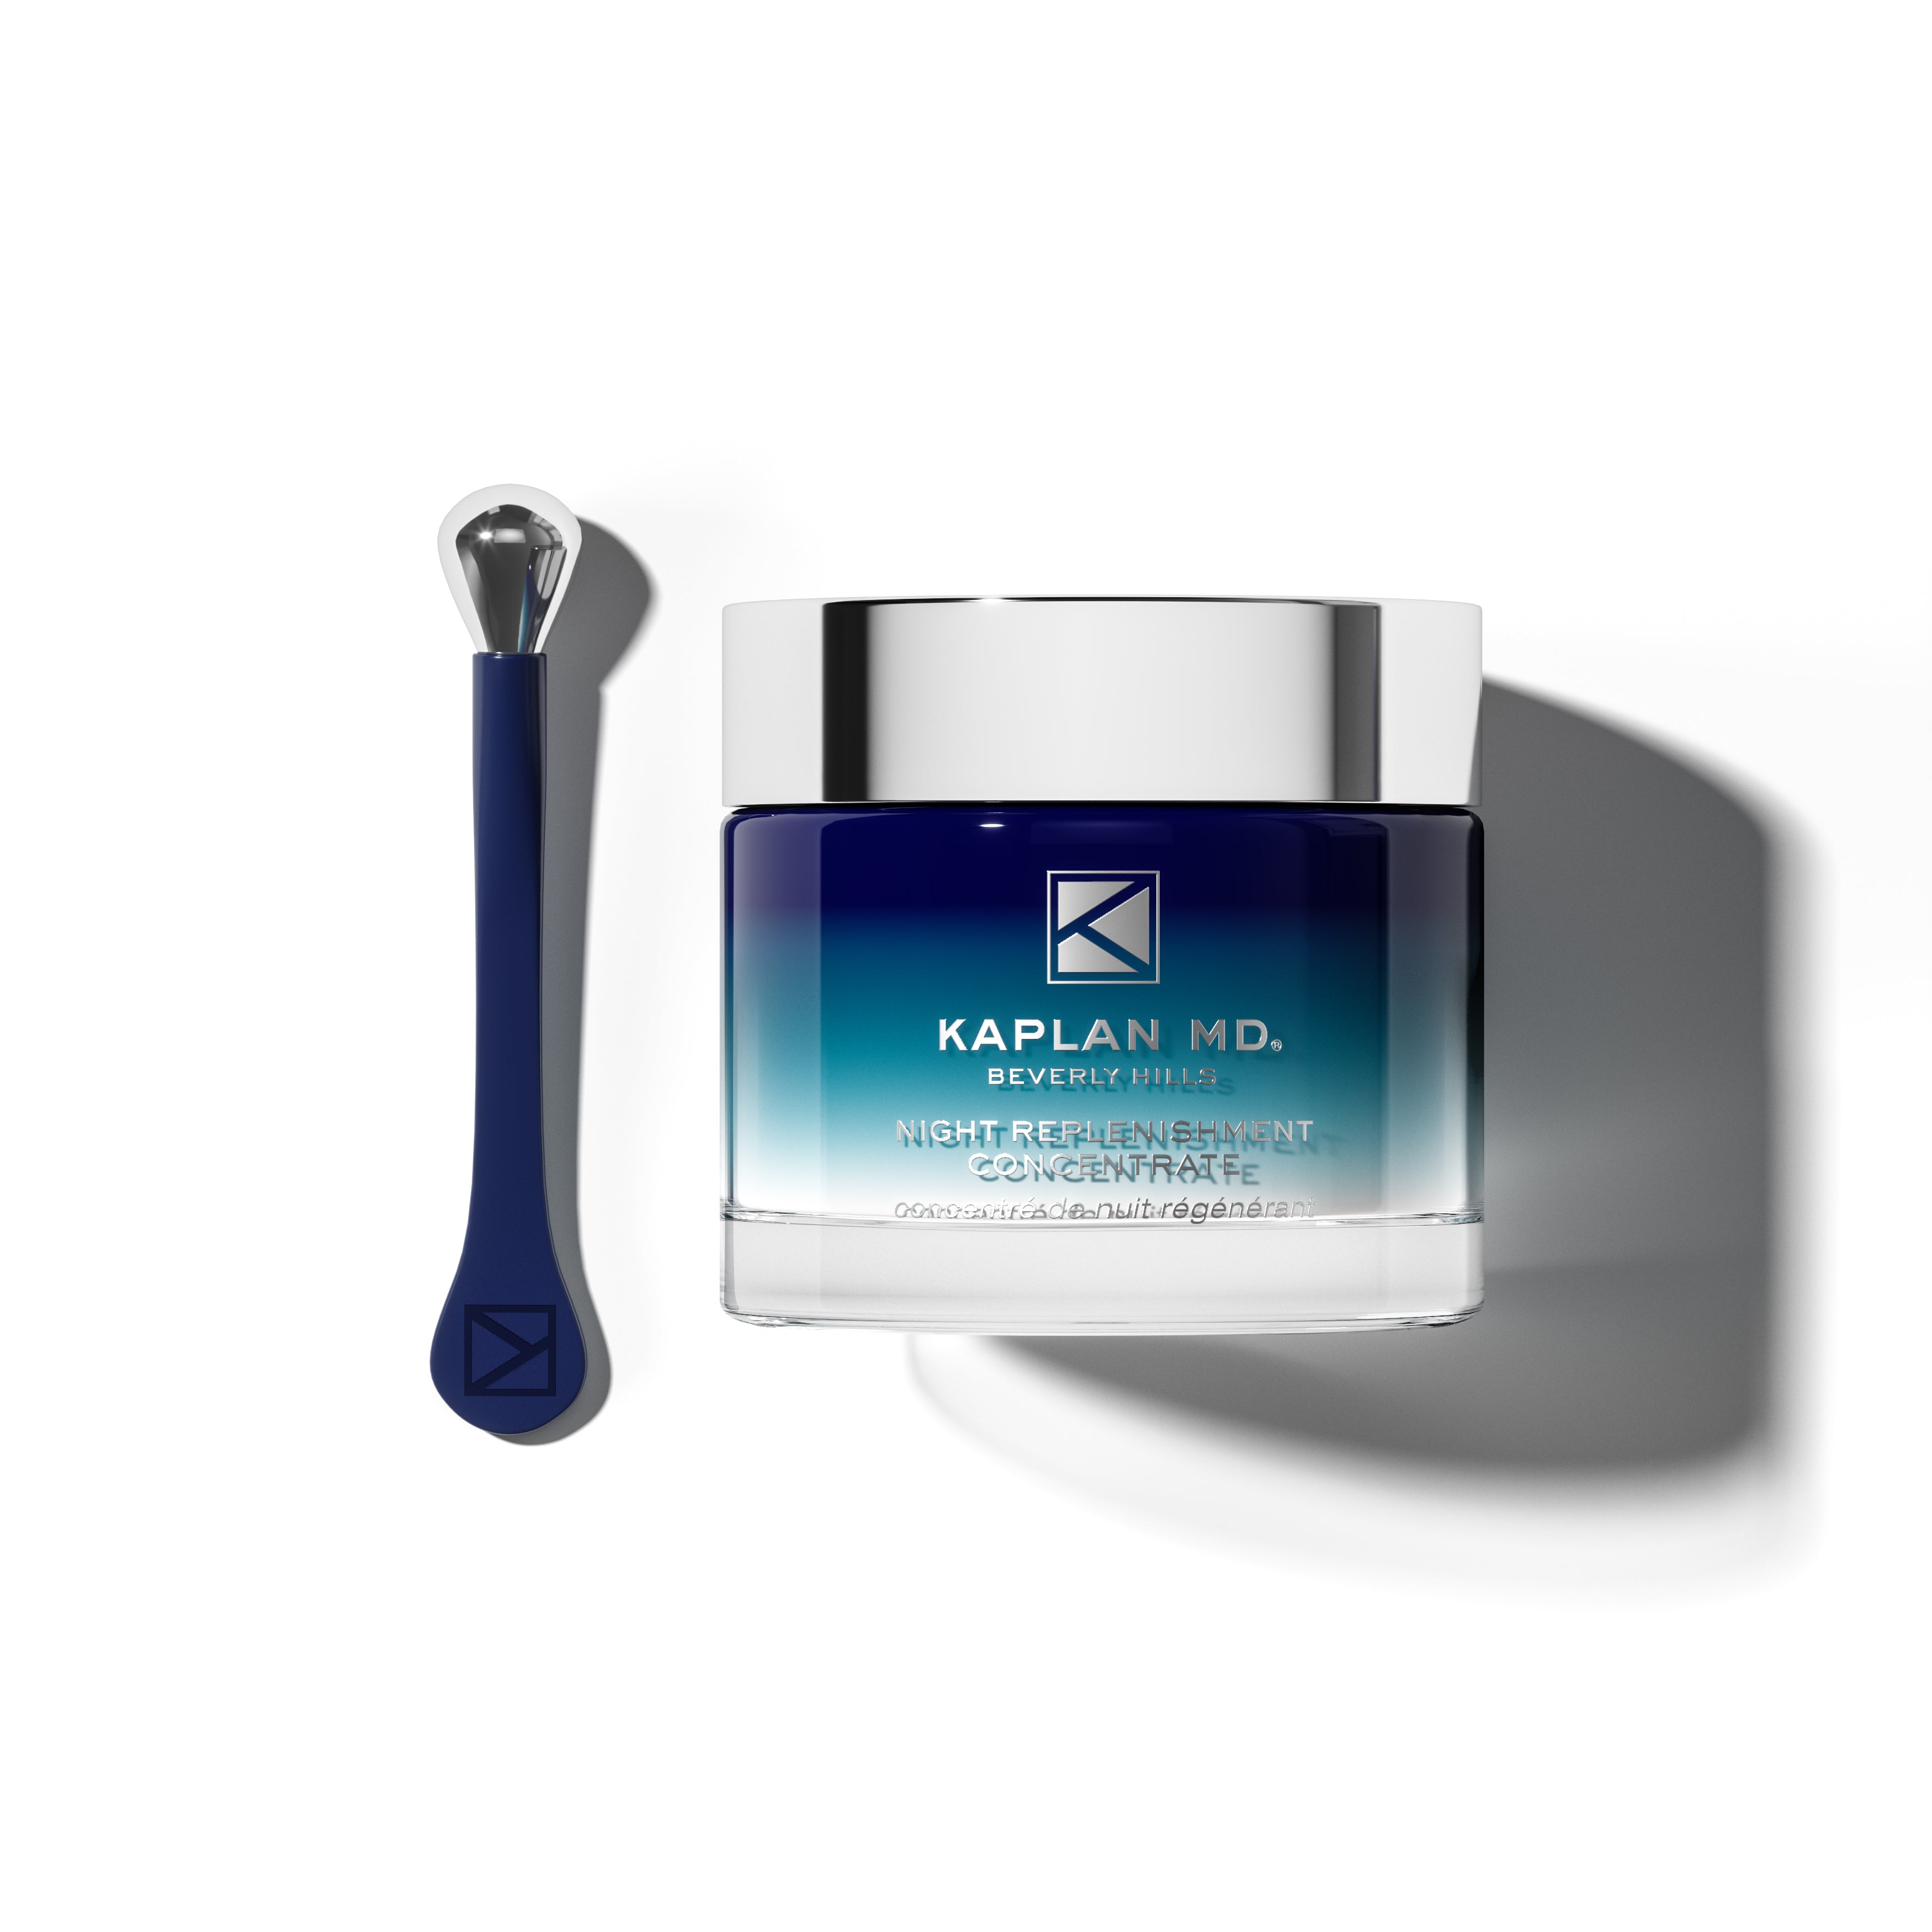 Kaplan MD Shop - NIGHT REPLENISHMENT CONCENTRATE